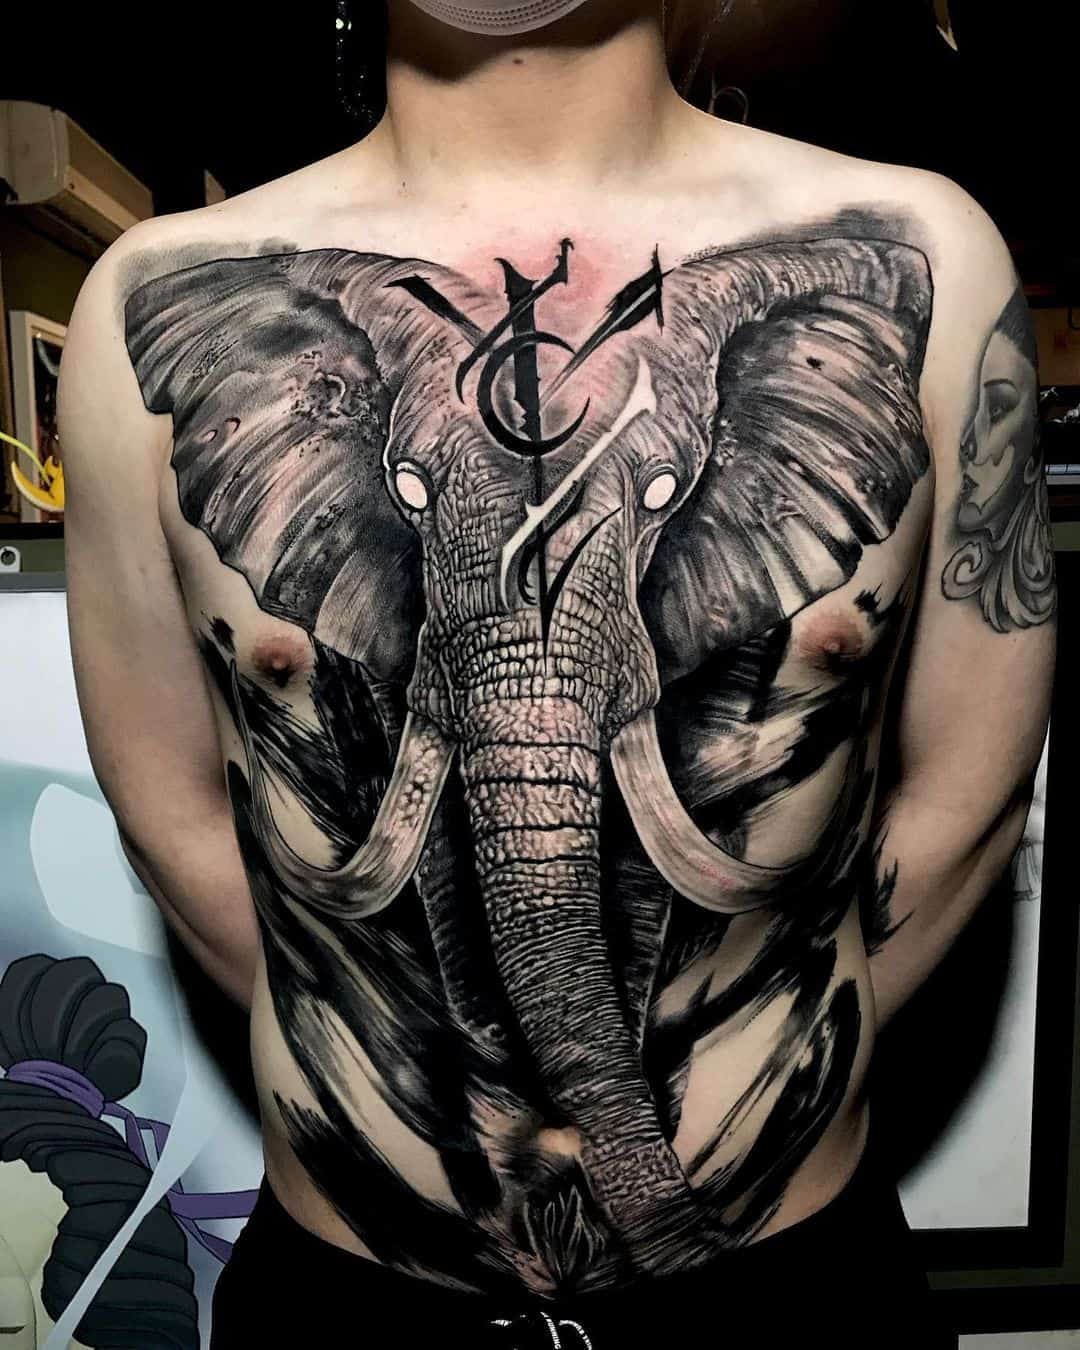 Top 61 Best Small Elephant Tattoo Ideas - [2021 Inspiration Guide]